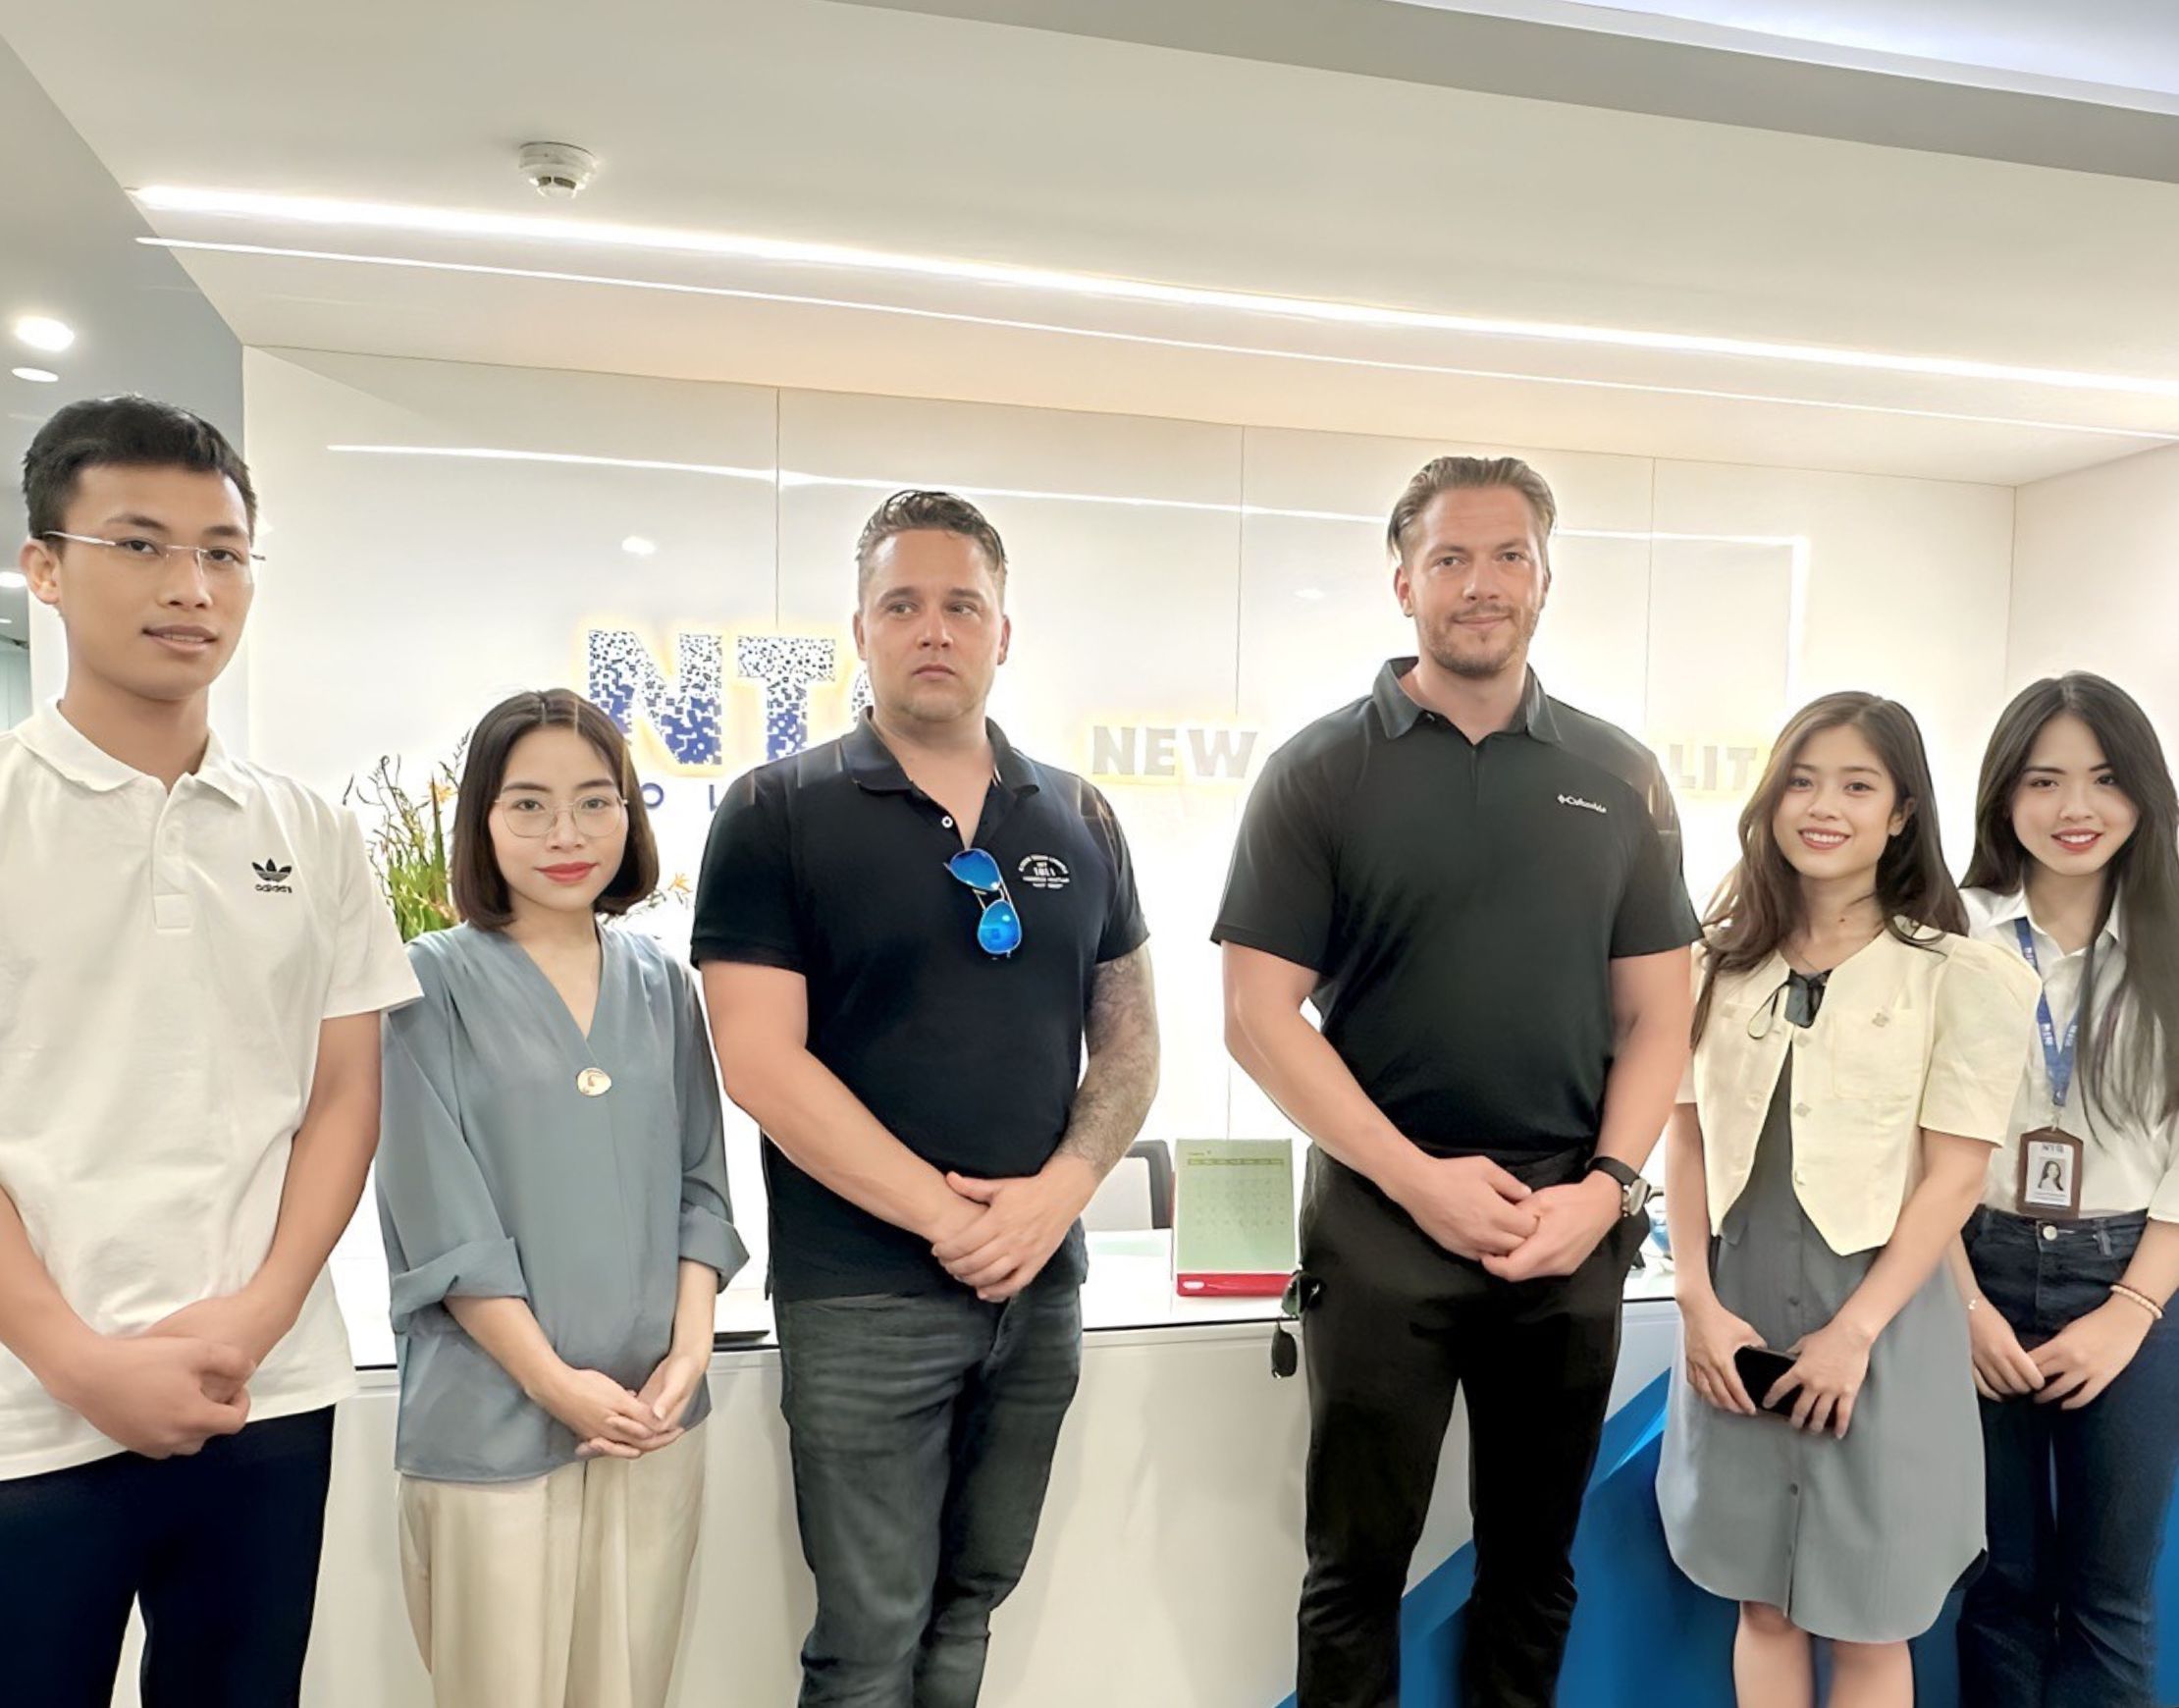 CAPALUS: “We have amazing experiences during working with NTQ Solution in Vietnam”